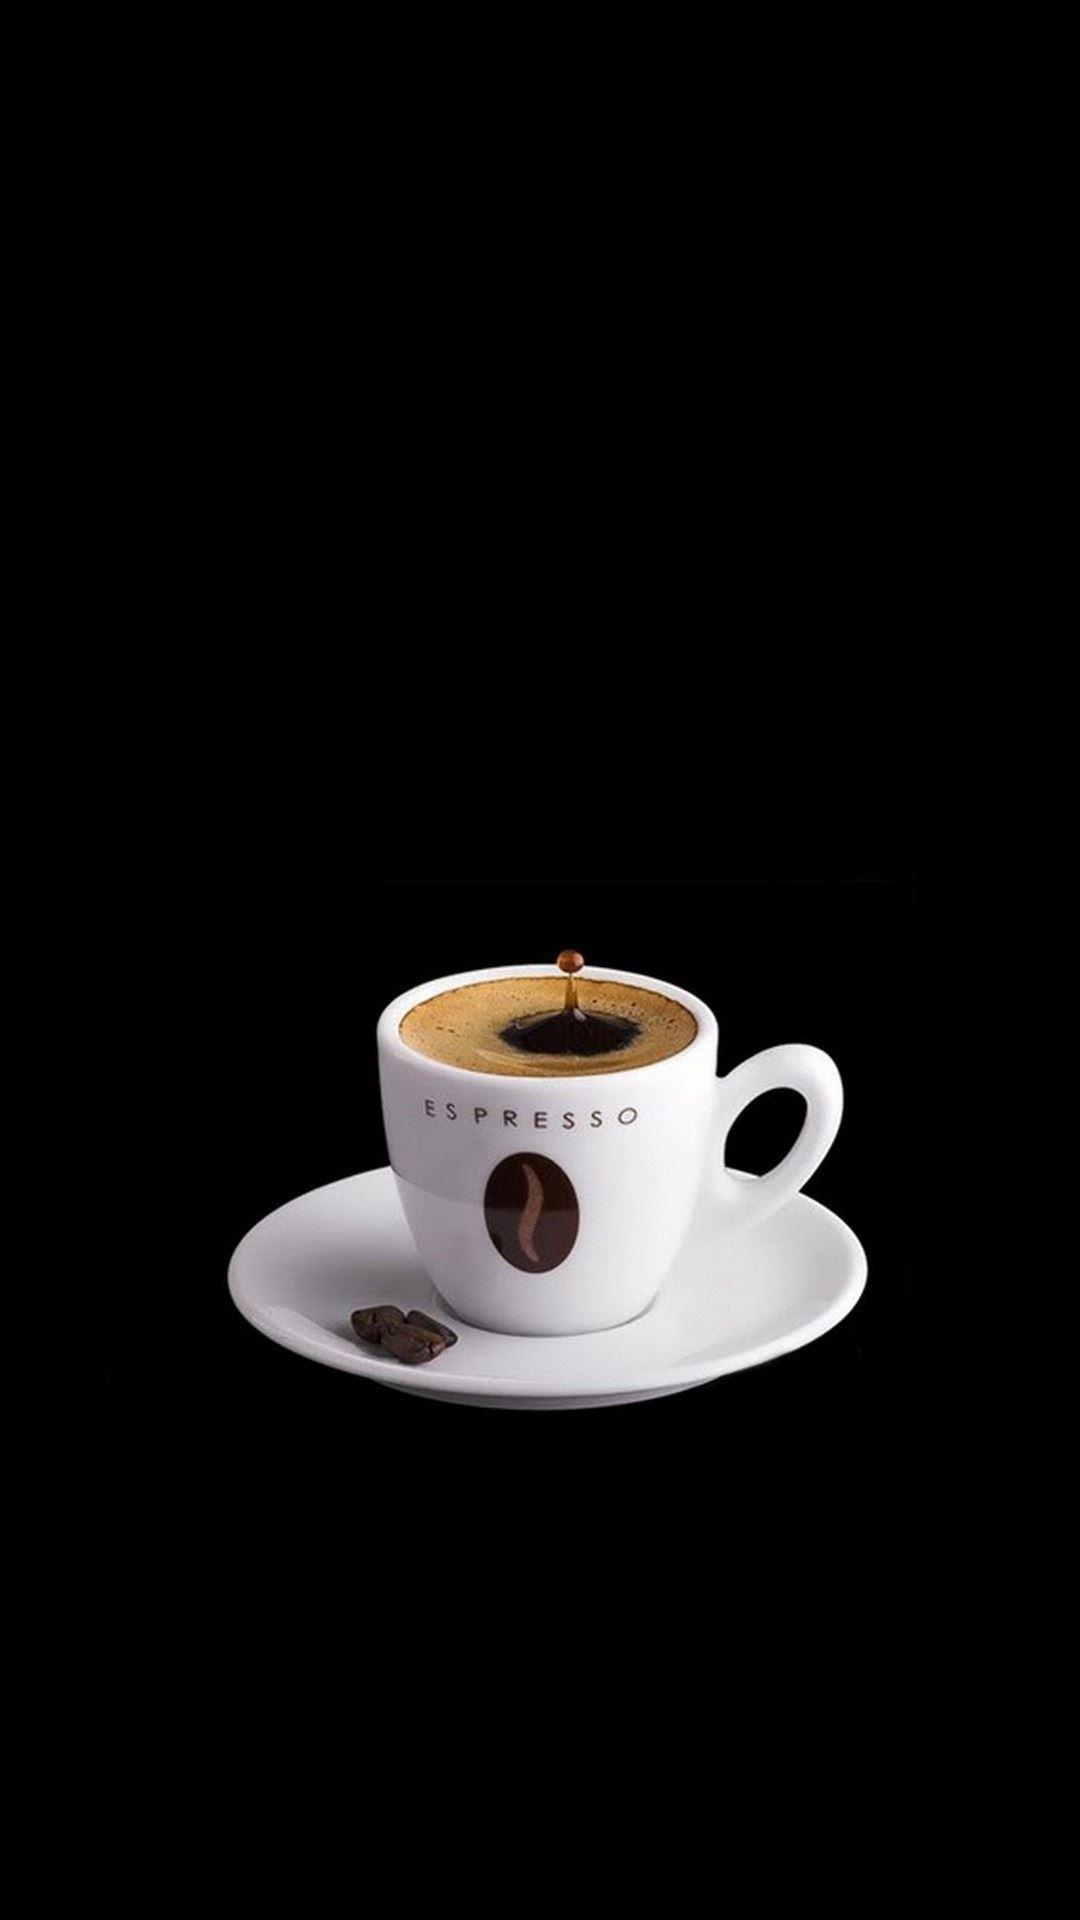 Espresso Coffee Cup iPhone 8 Wallpaper Free Download